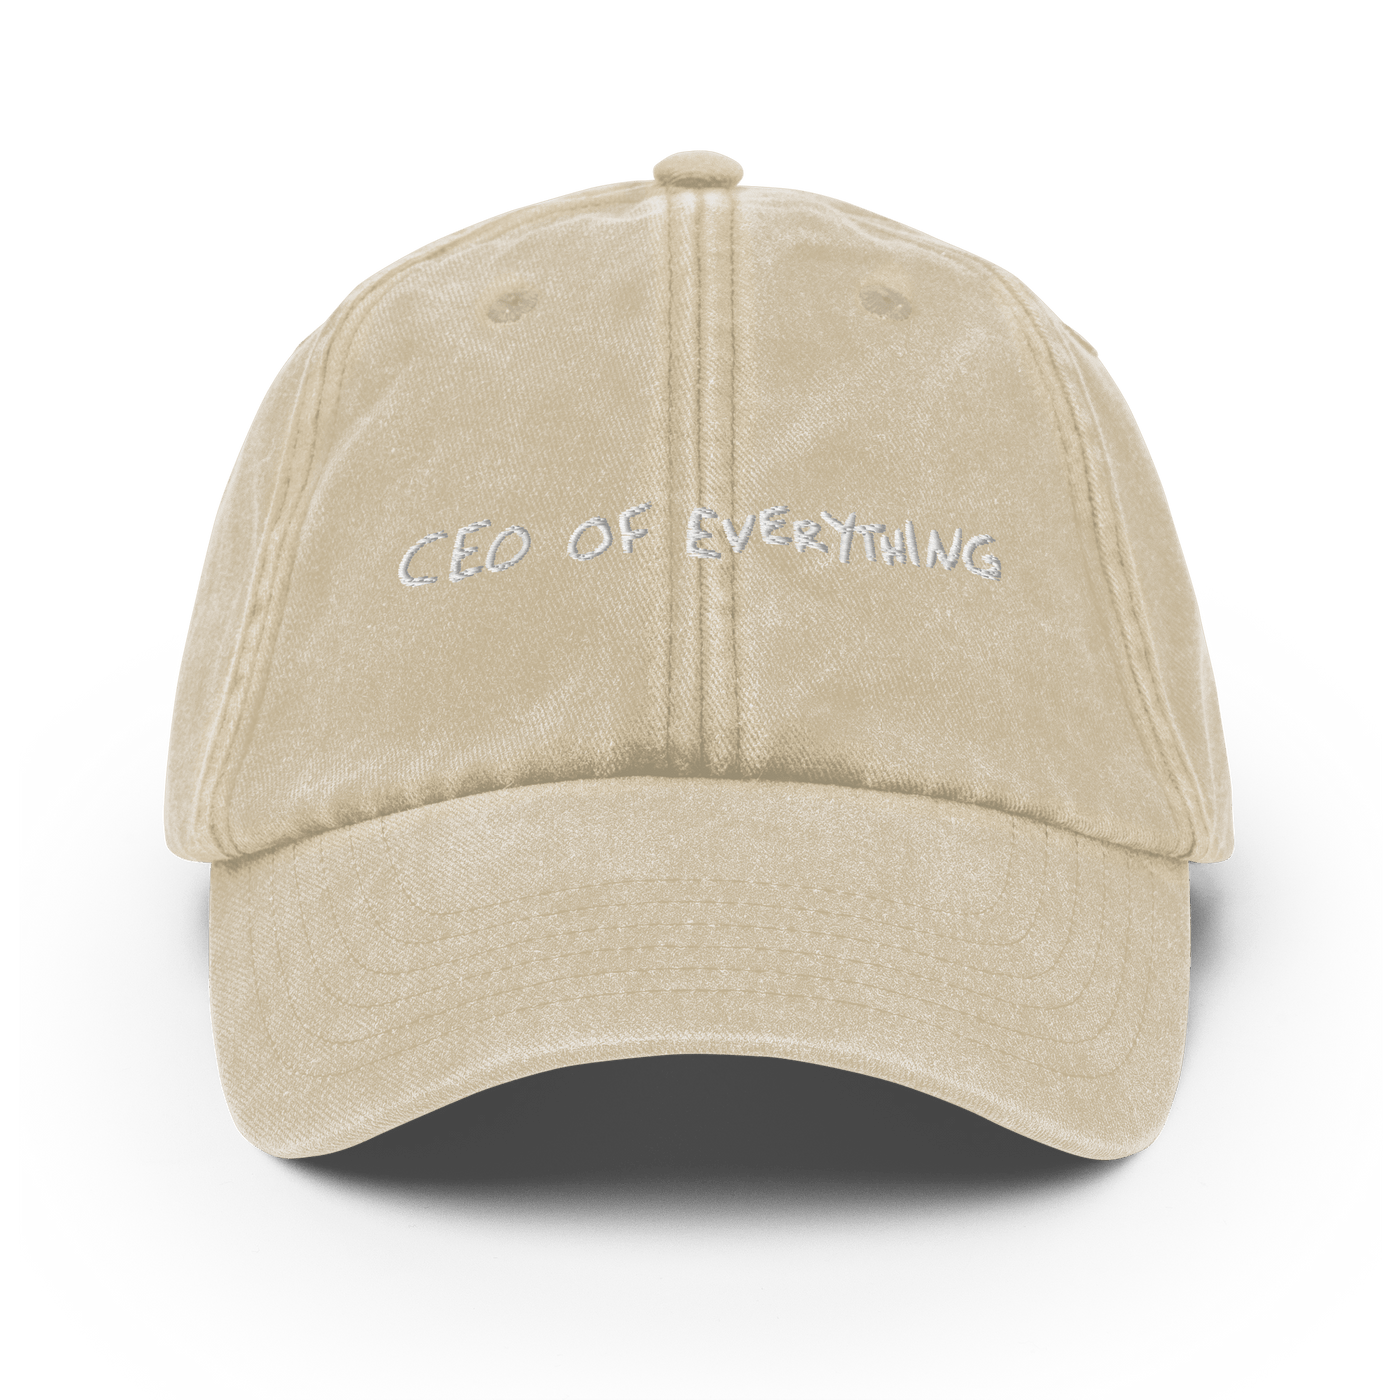 CEO of everything Vintage Hat - Vintage Light Denim - - Just Another Cap Store